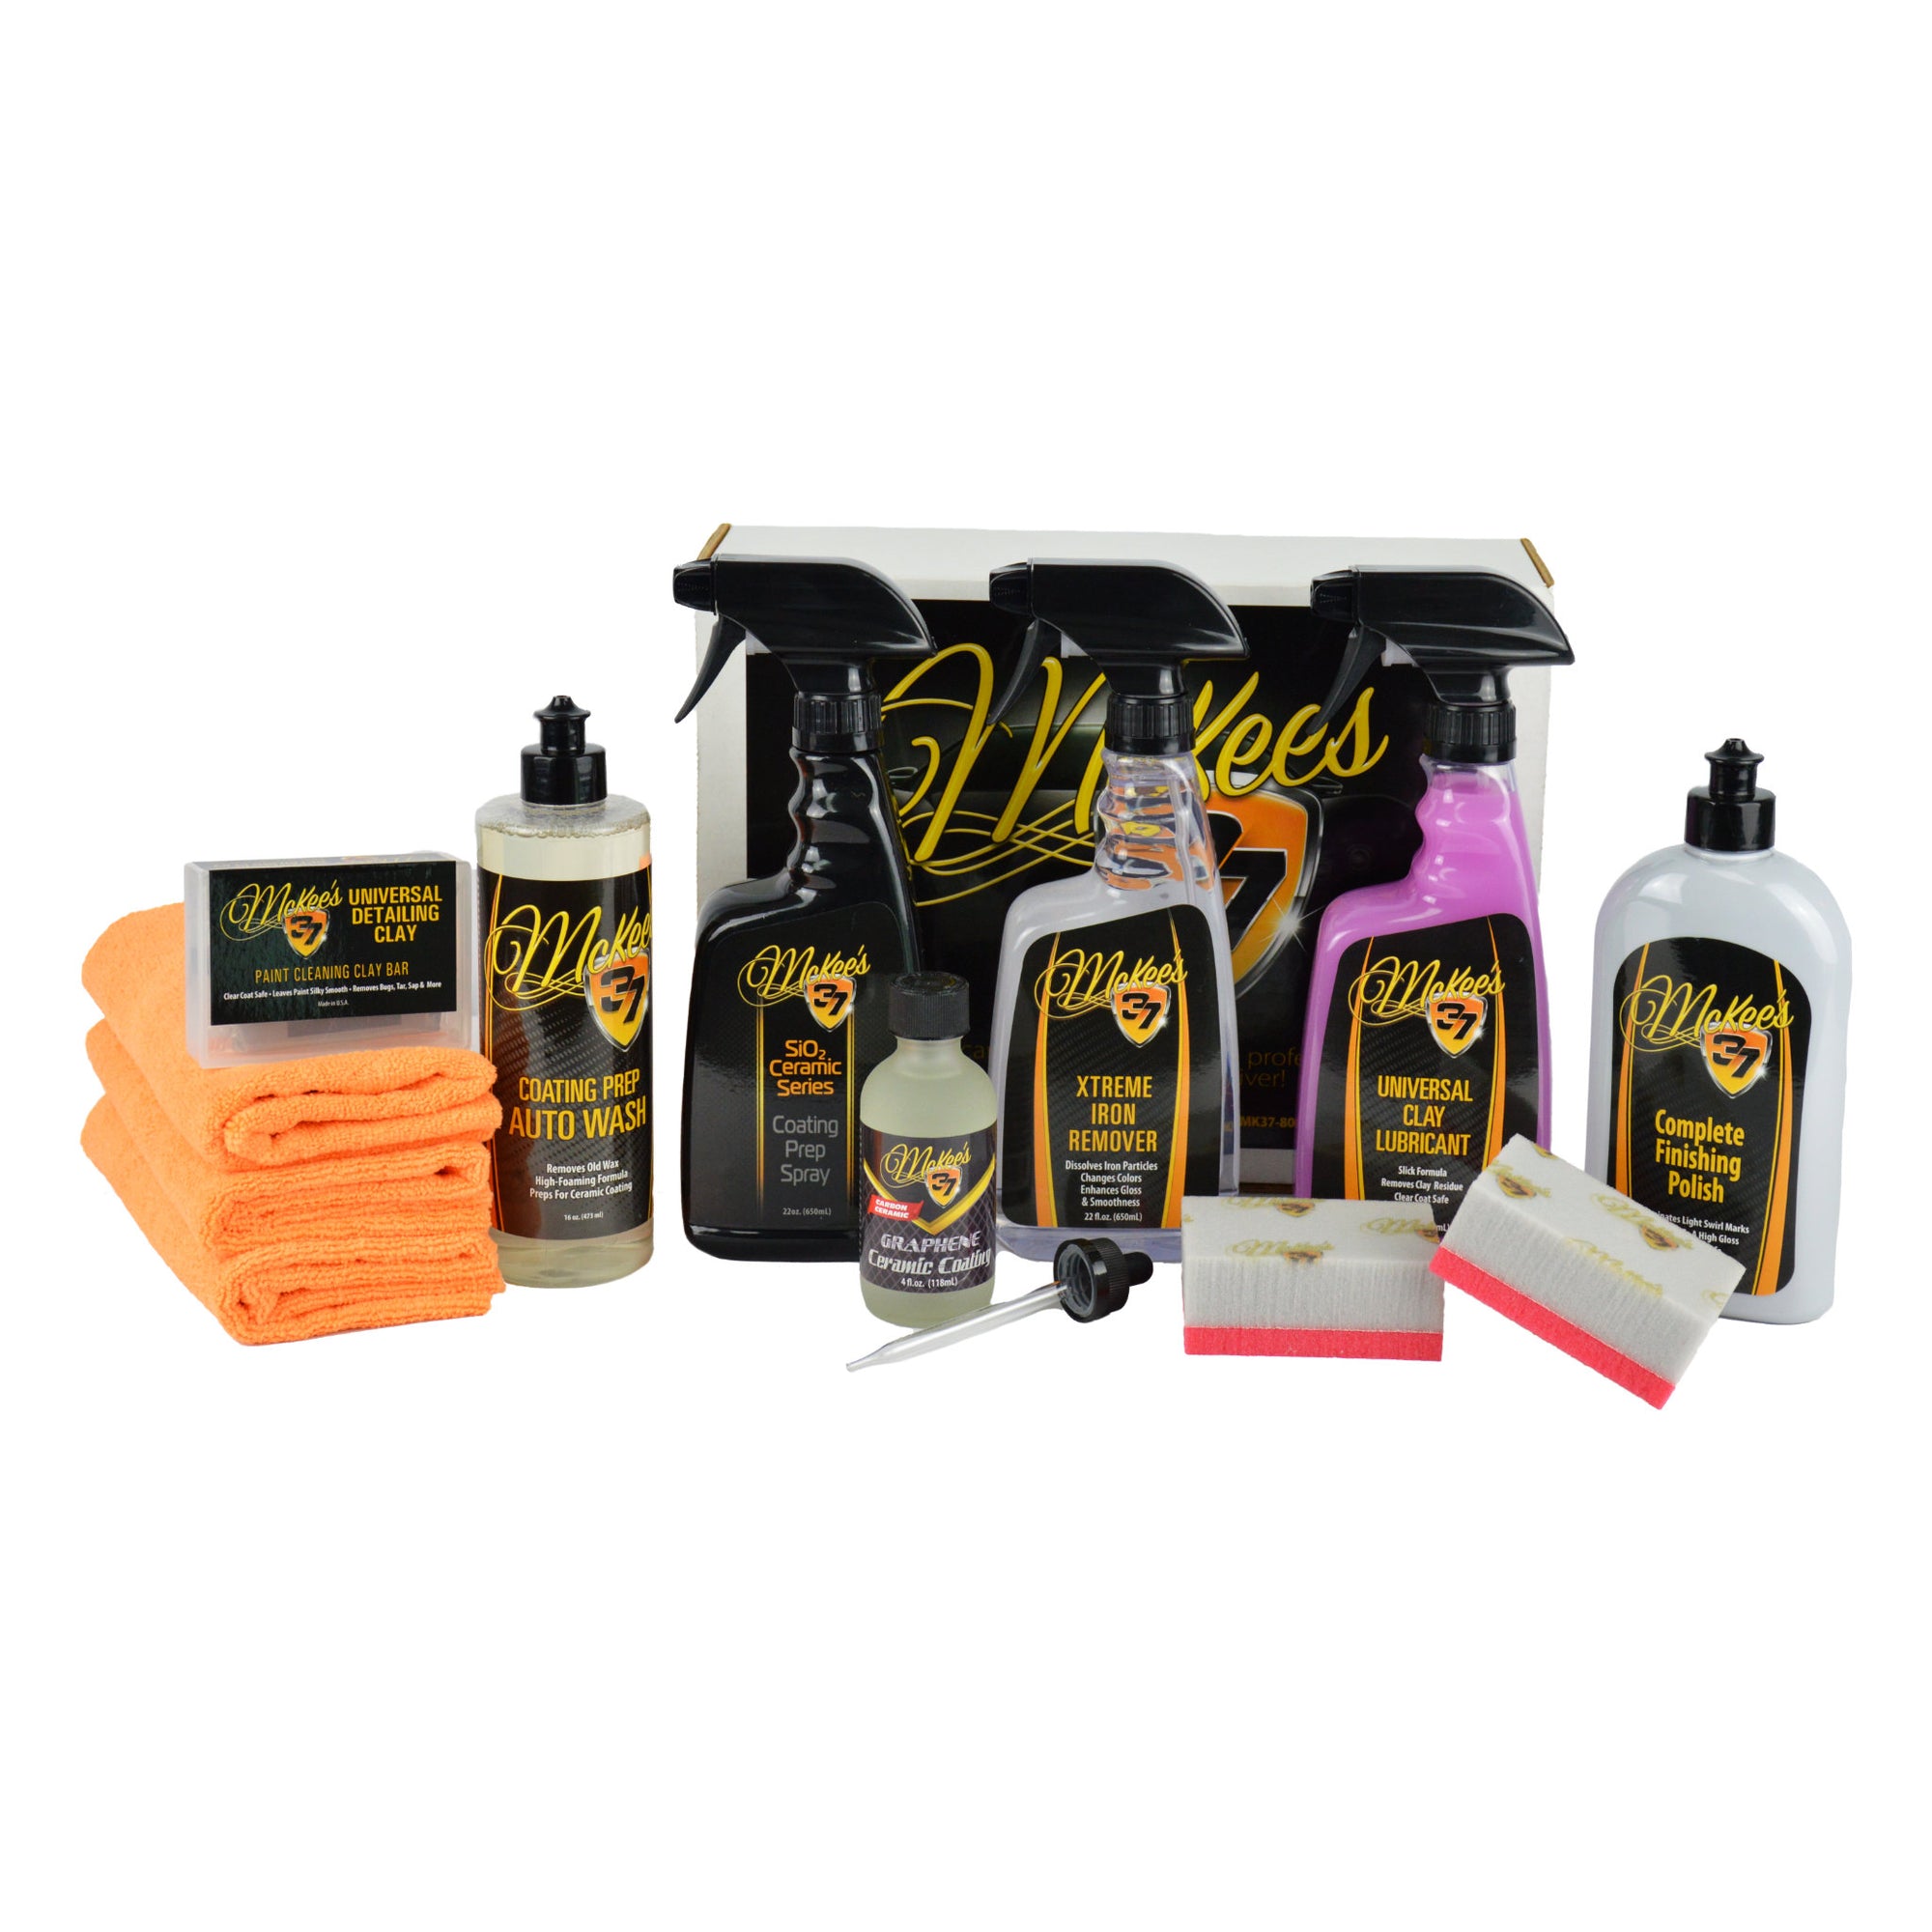 McKee’s 37 Matte Cleaner & Protectant